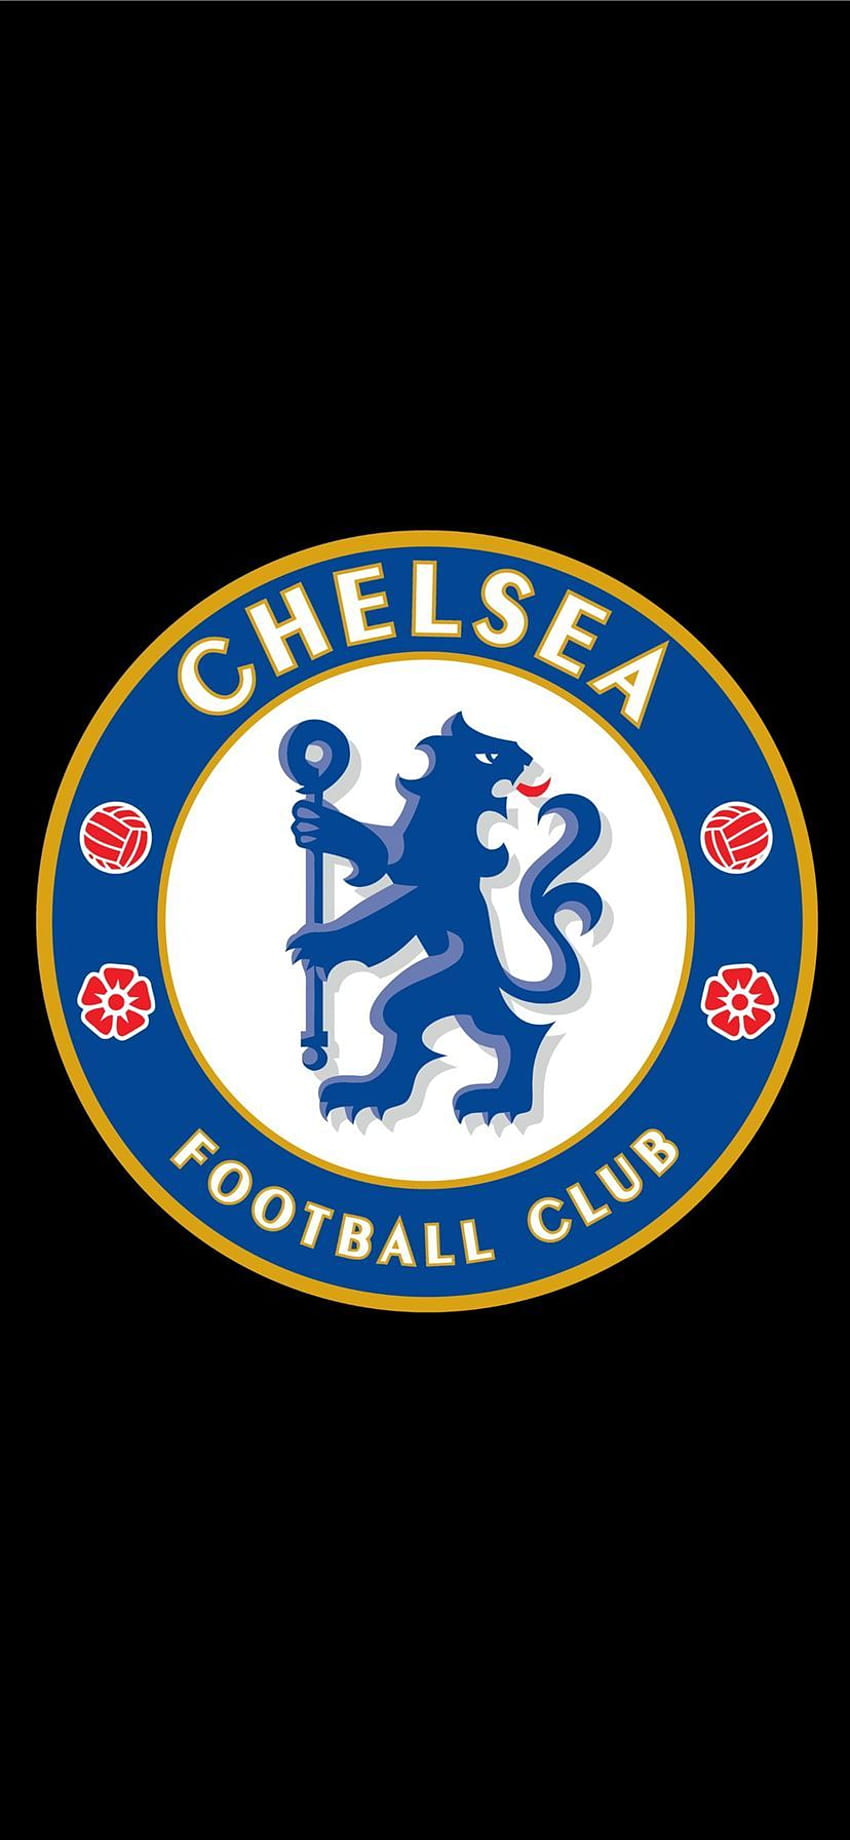 Chelsea Football Club Chelsea Fc backgrounds iPhone X, chelsea android HD phone wallpaper